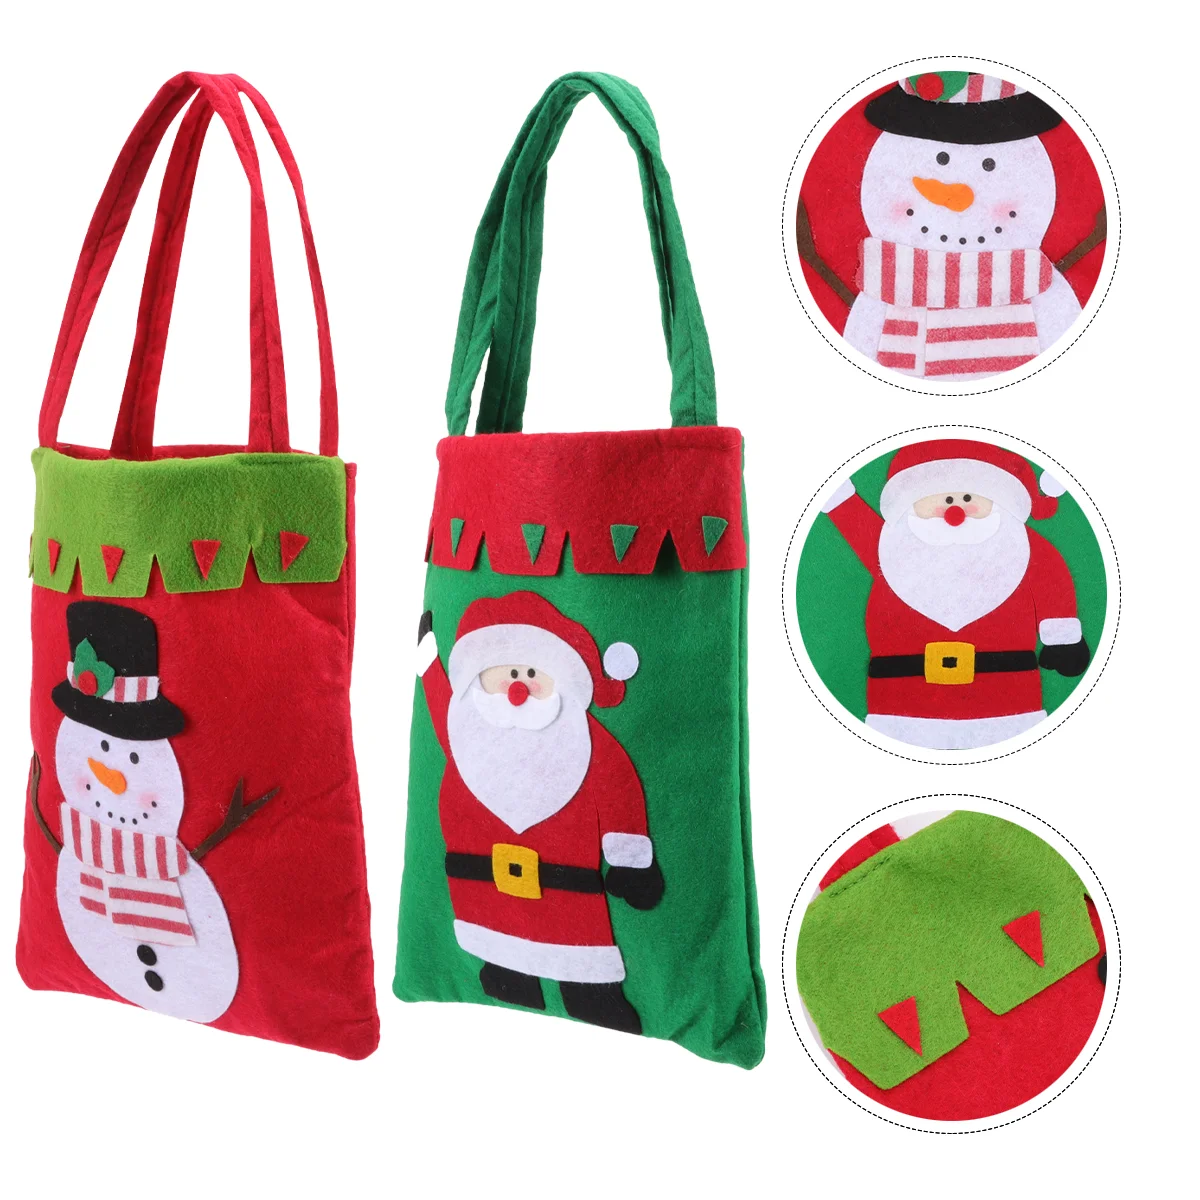 

Bag Gift Christmas Tote Bags Box Xmas Pouchsanta Candy Present Biscuit Party Packing Treats Decorative Cookie Treat Holiday Sack